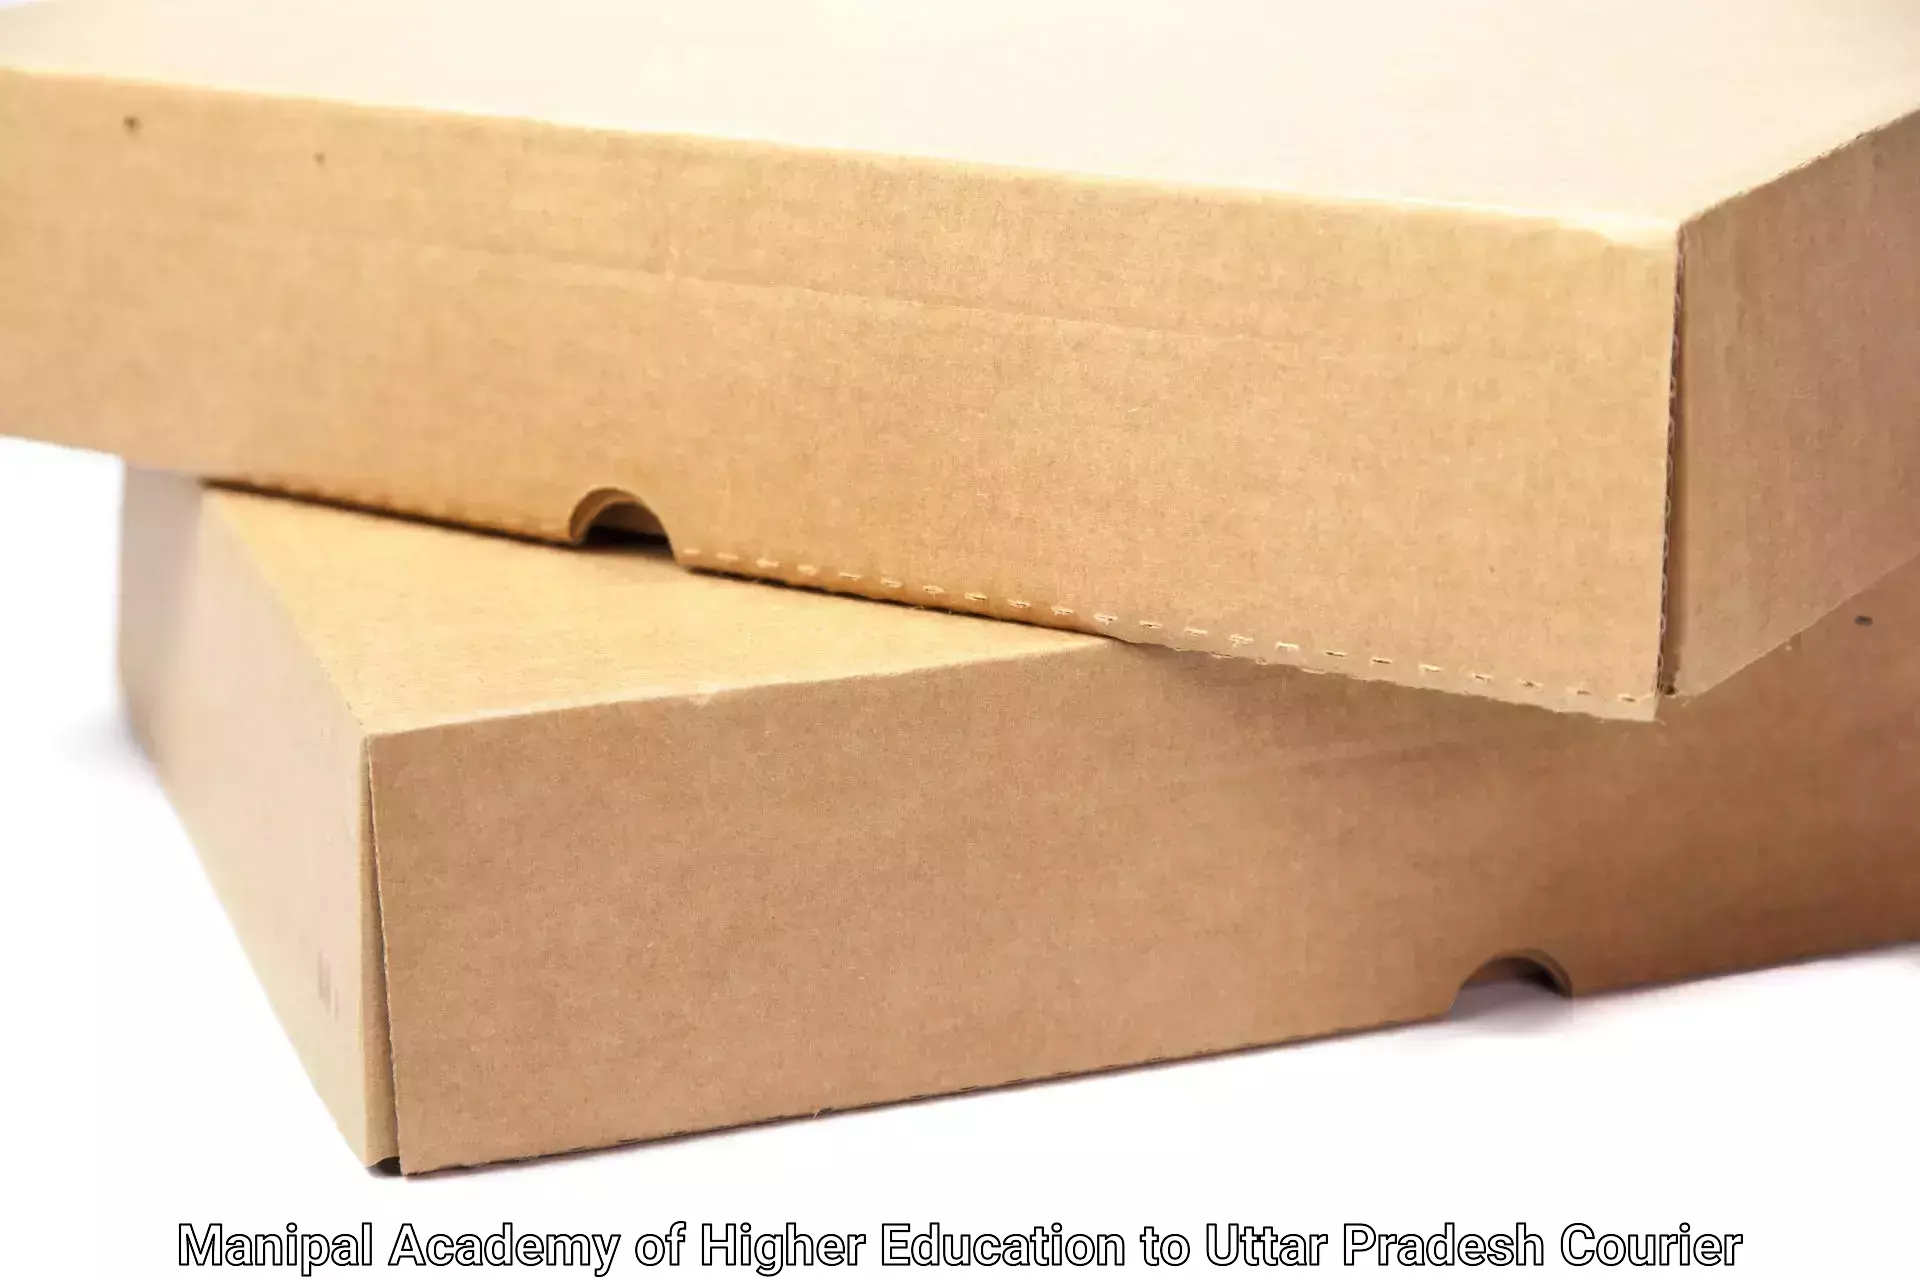 Efficient moving company Manipal Academy of Higher Education to Uttar Pradesh